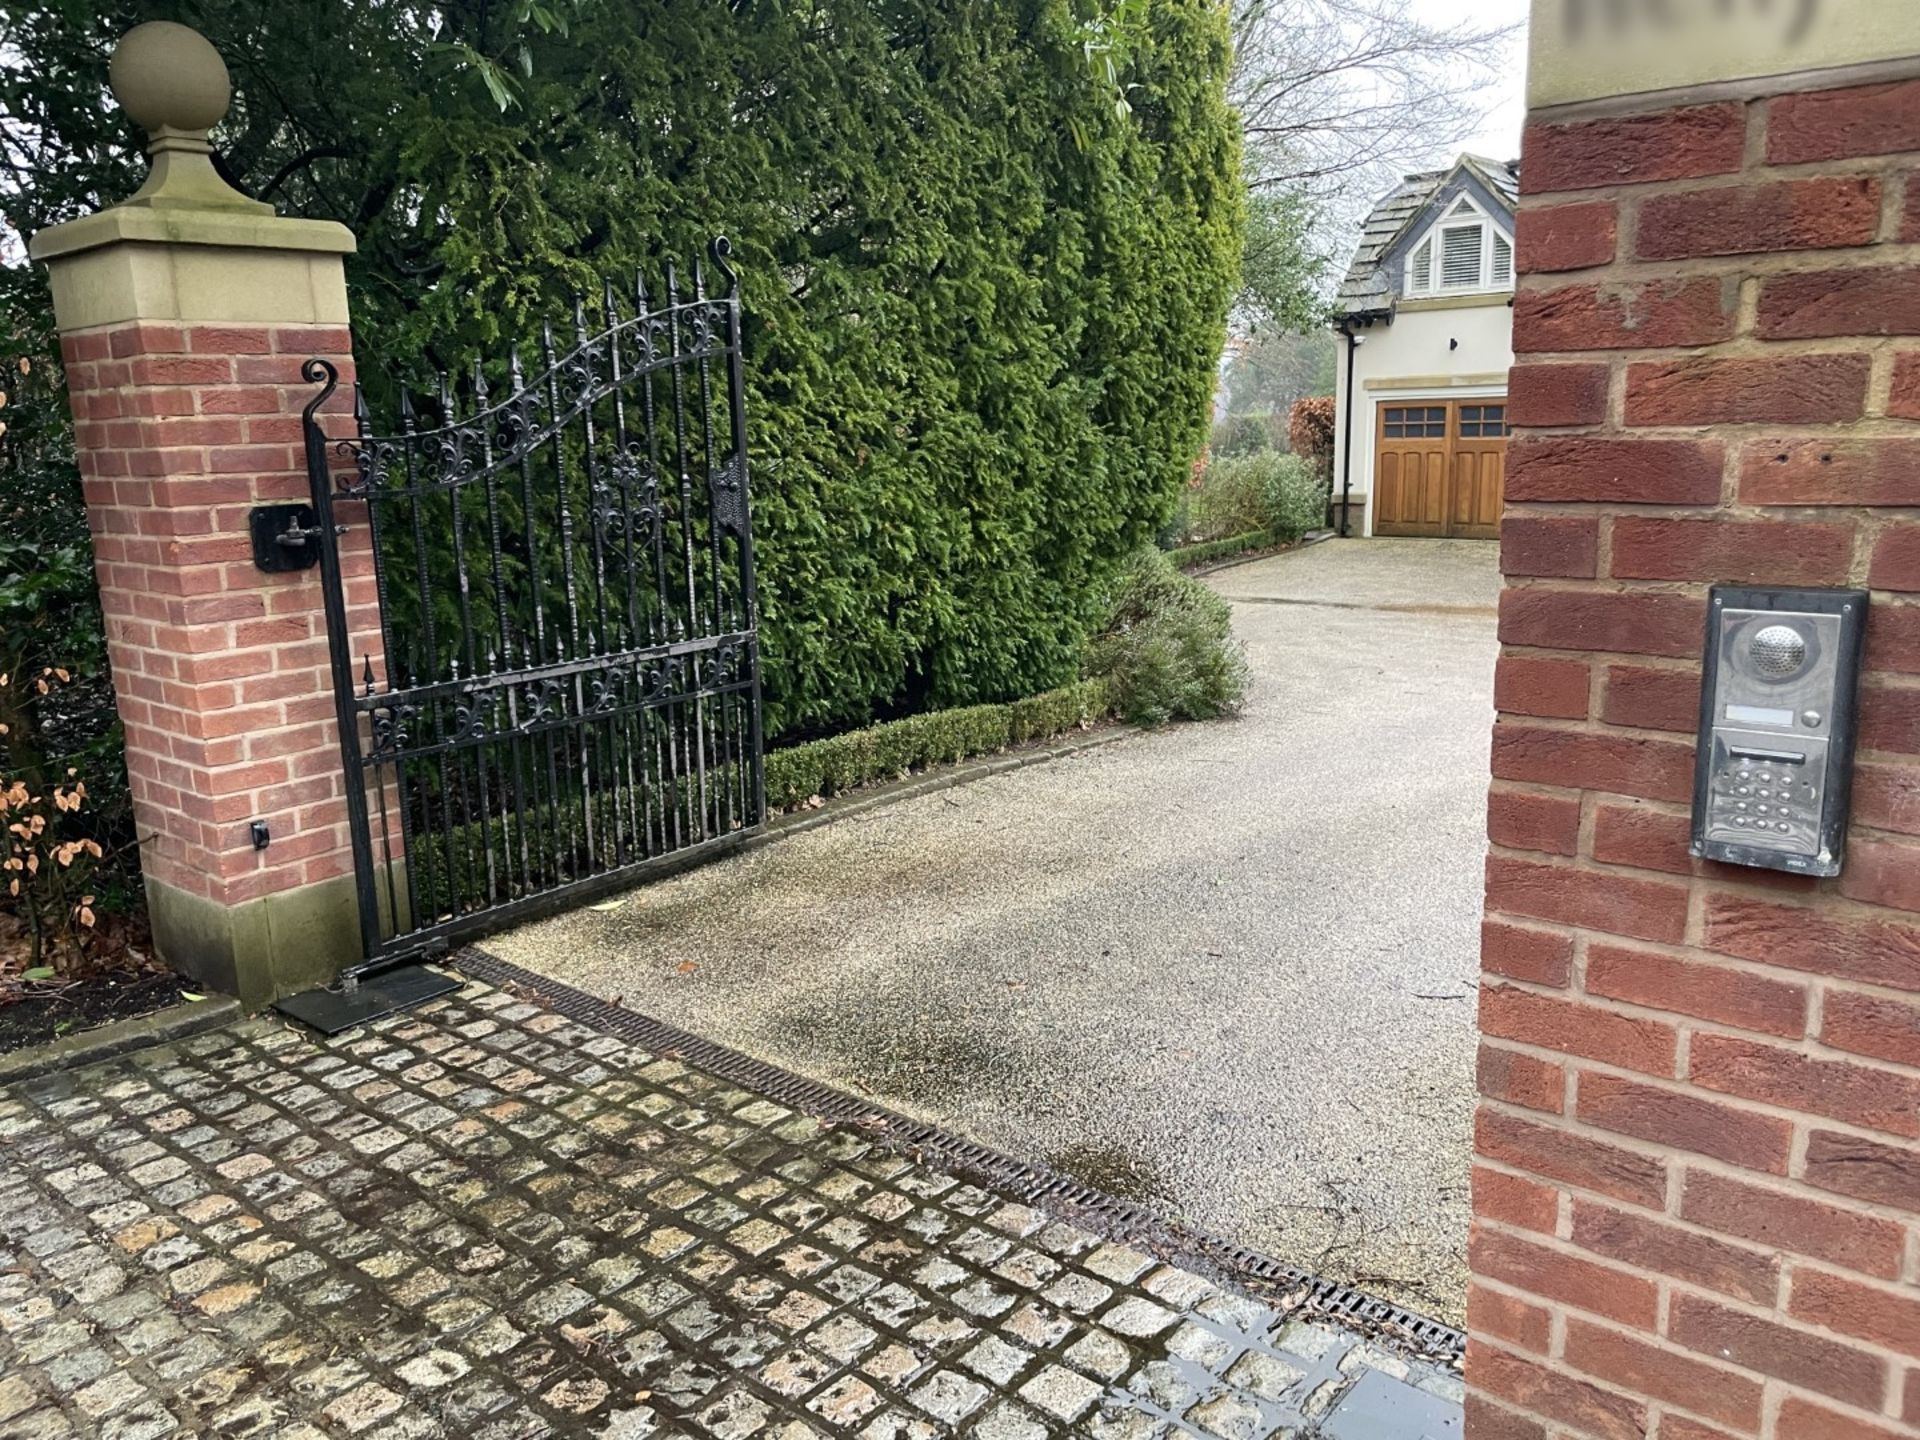 1 x Electric Ornate Double Swing Metal Main Entrance Security Gate - Ref: UP10 - NO VAT ON HAMMER - Image 15 of 19